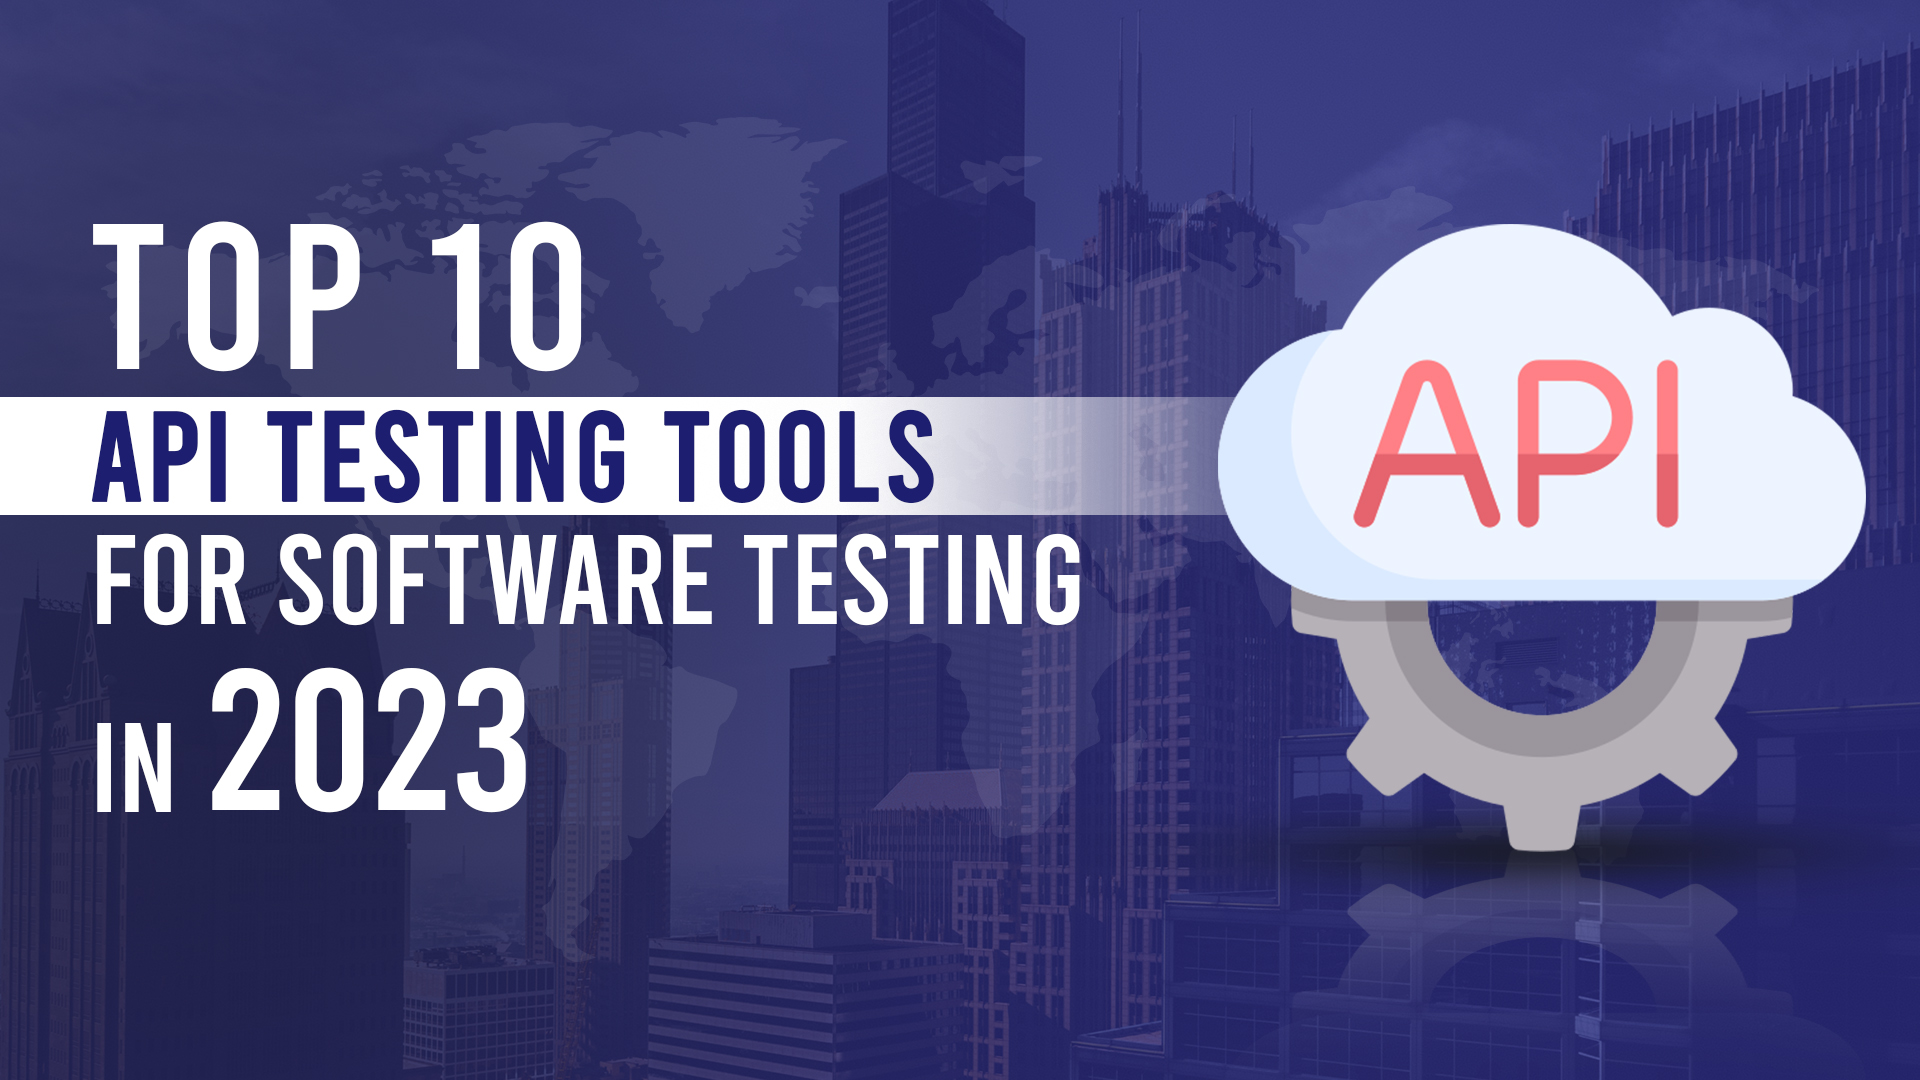 Top 10 API Testing Tools for Software Testing in 2023